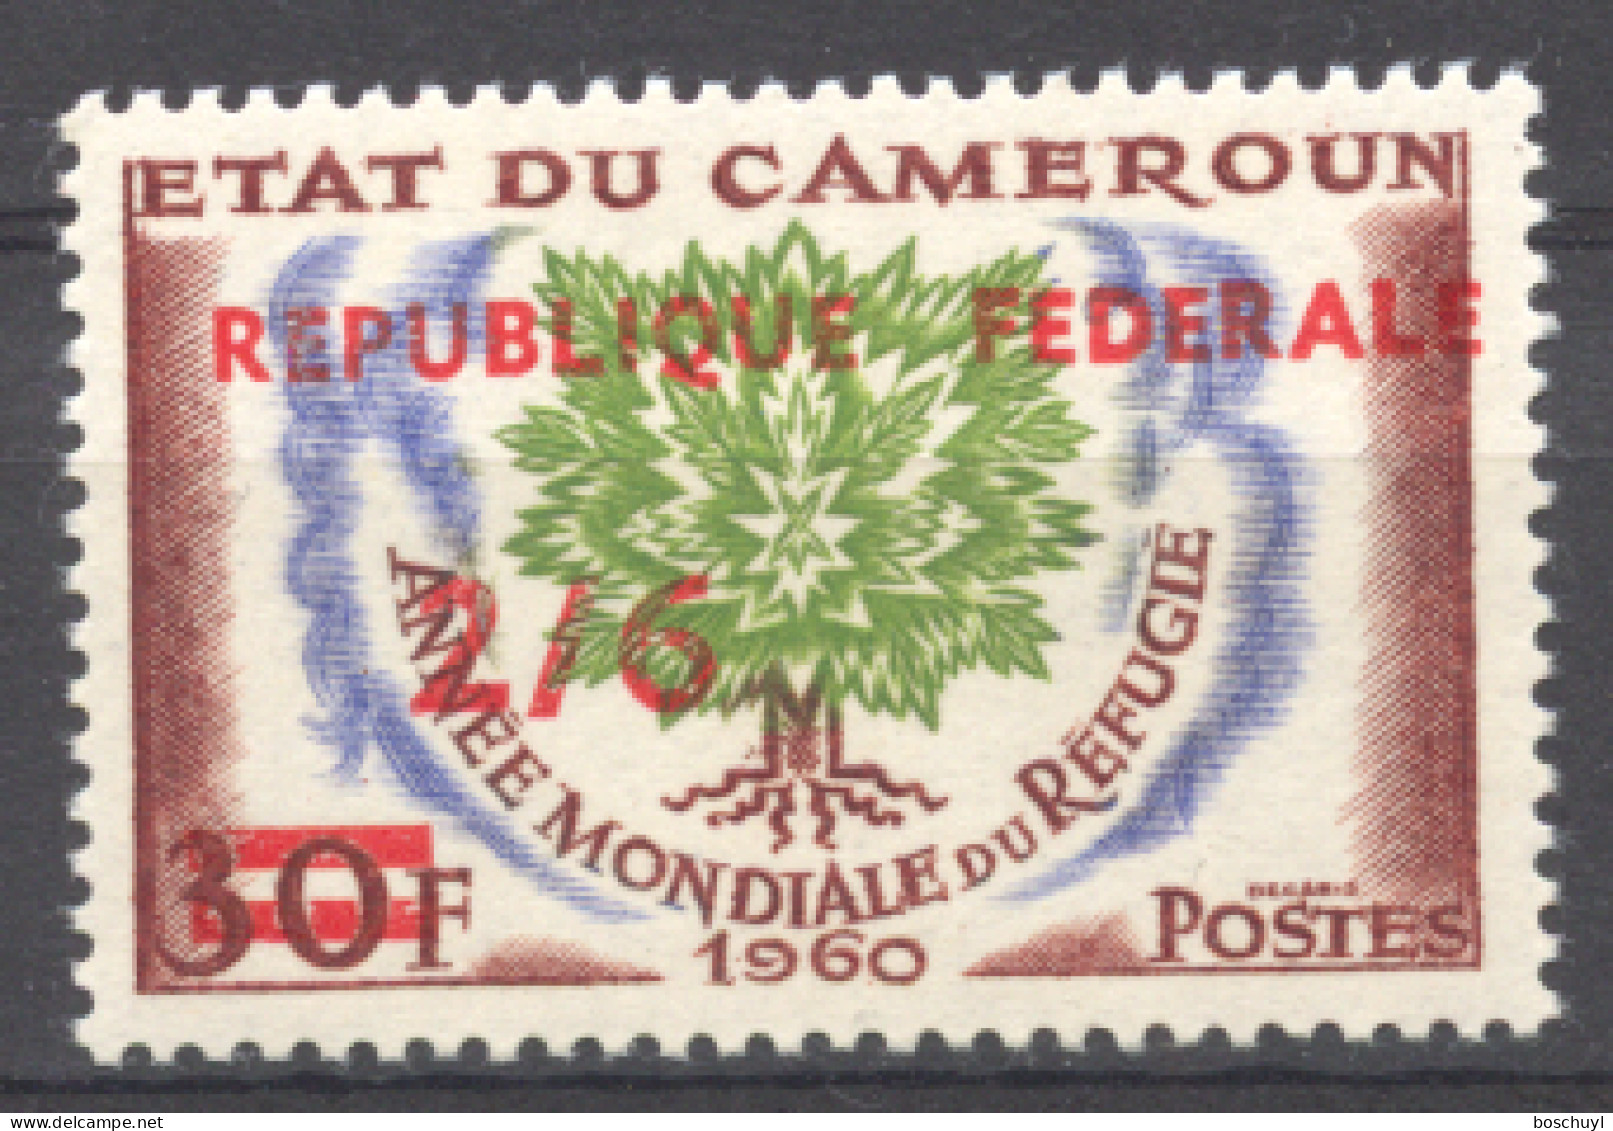 Cameroon, UKTT, 1960, World Refugee Year, WRY, United Nations, Overprinted And Revalued, MNH, Michel 21 Type II - Réfugiés